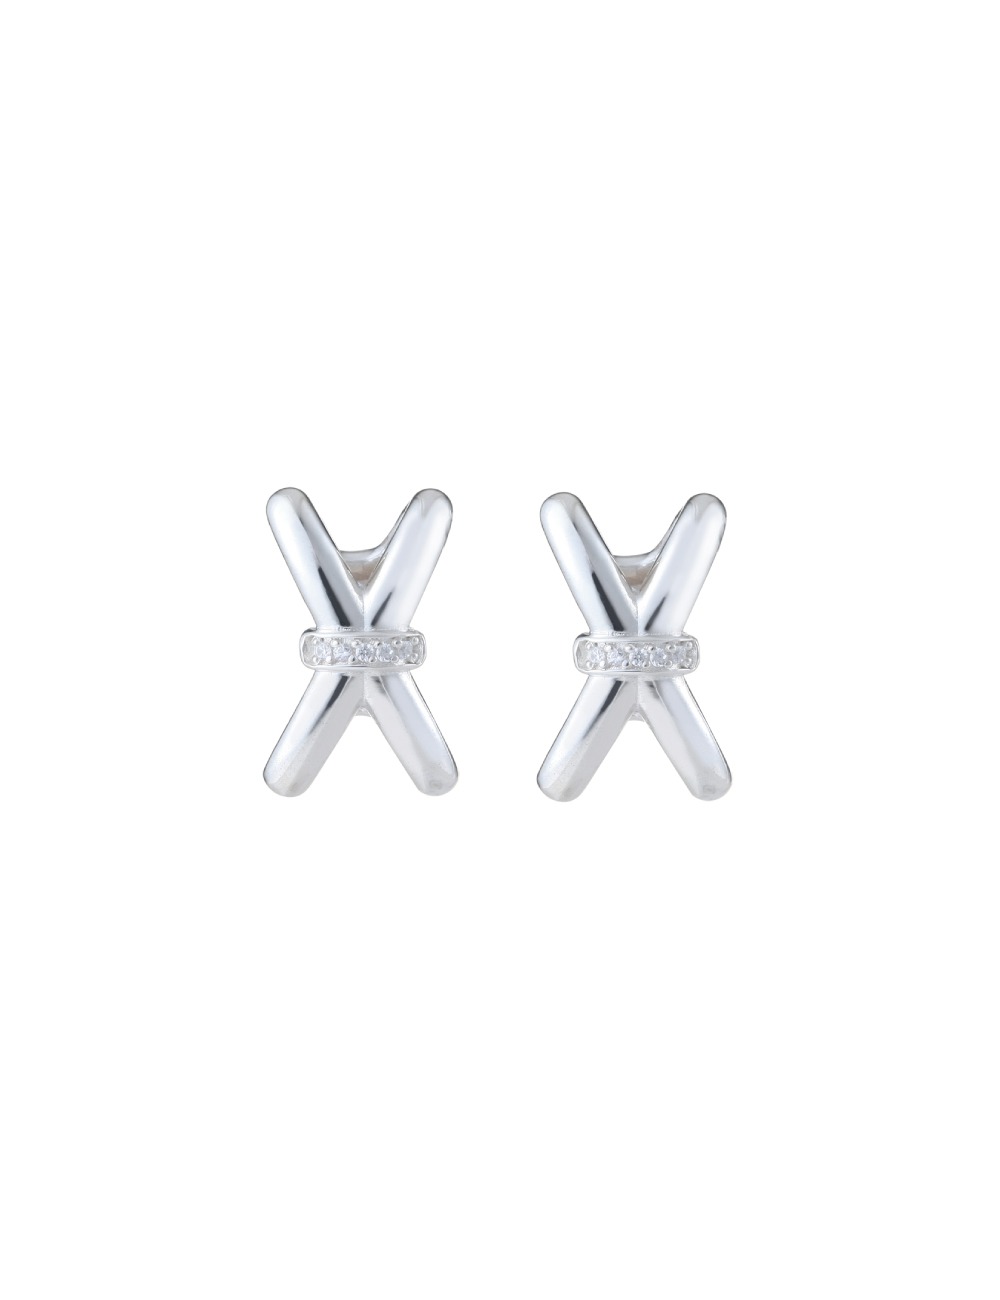 Cross wise Earring 크로스 와이즈 귀걸이 (Silver 실버)